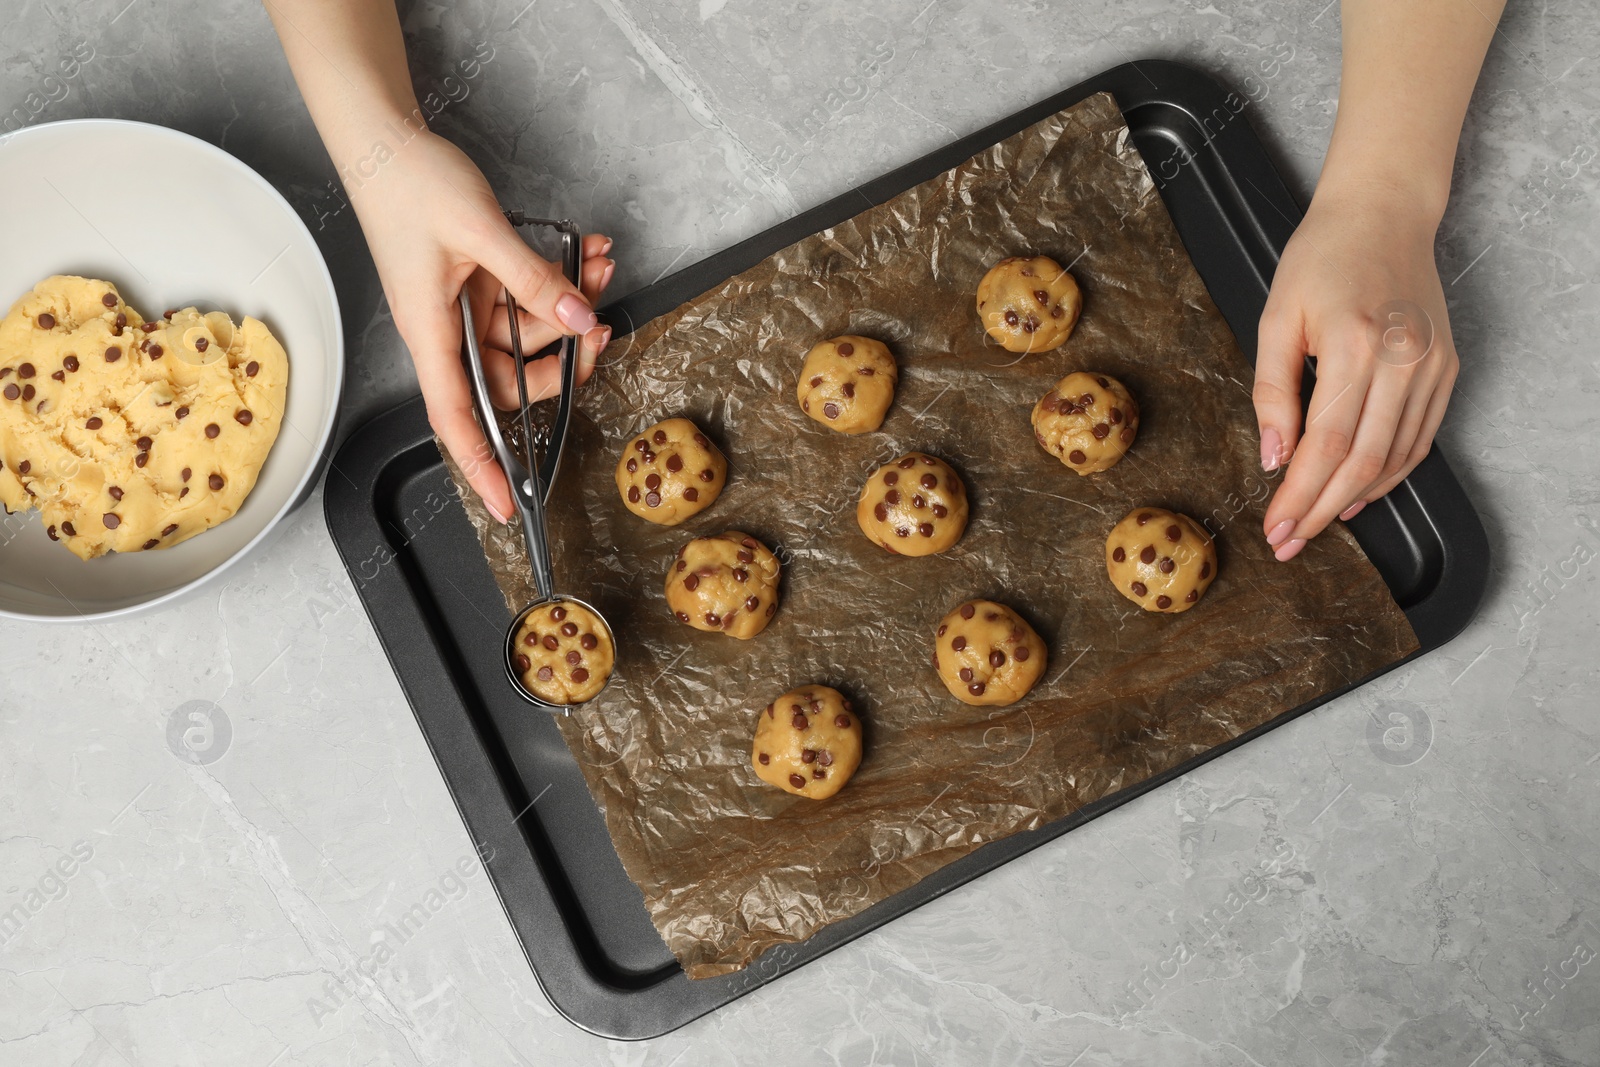 Photo of Woman making delicious chocolate chip cookies at light grey table, top view